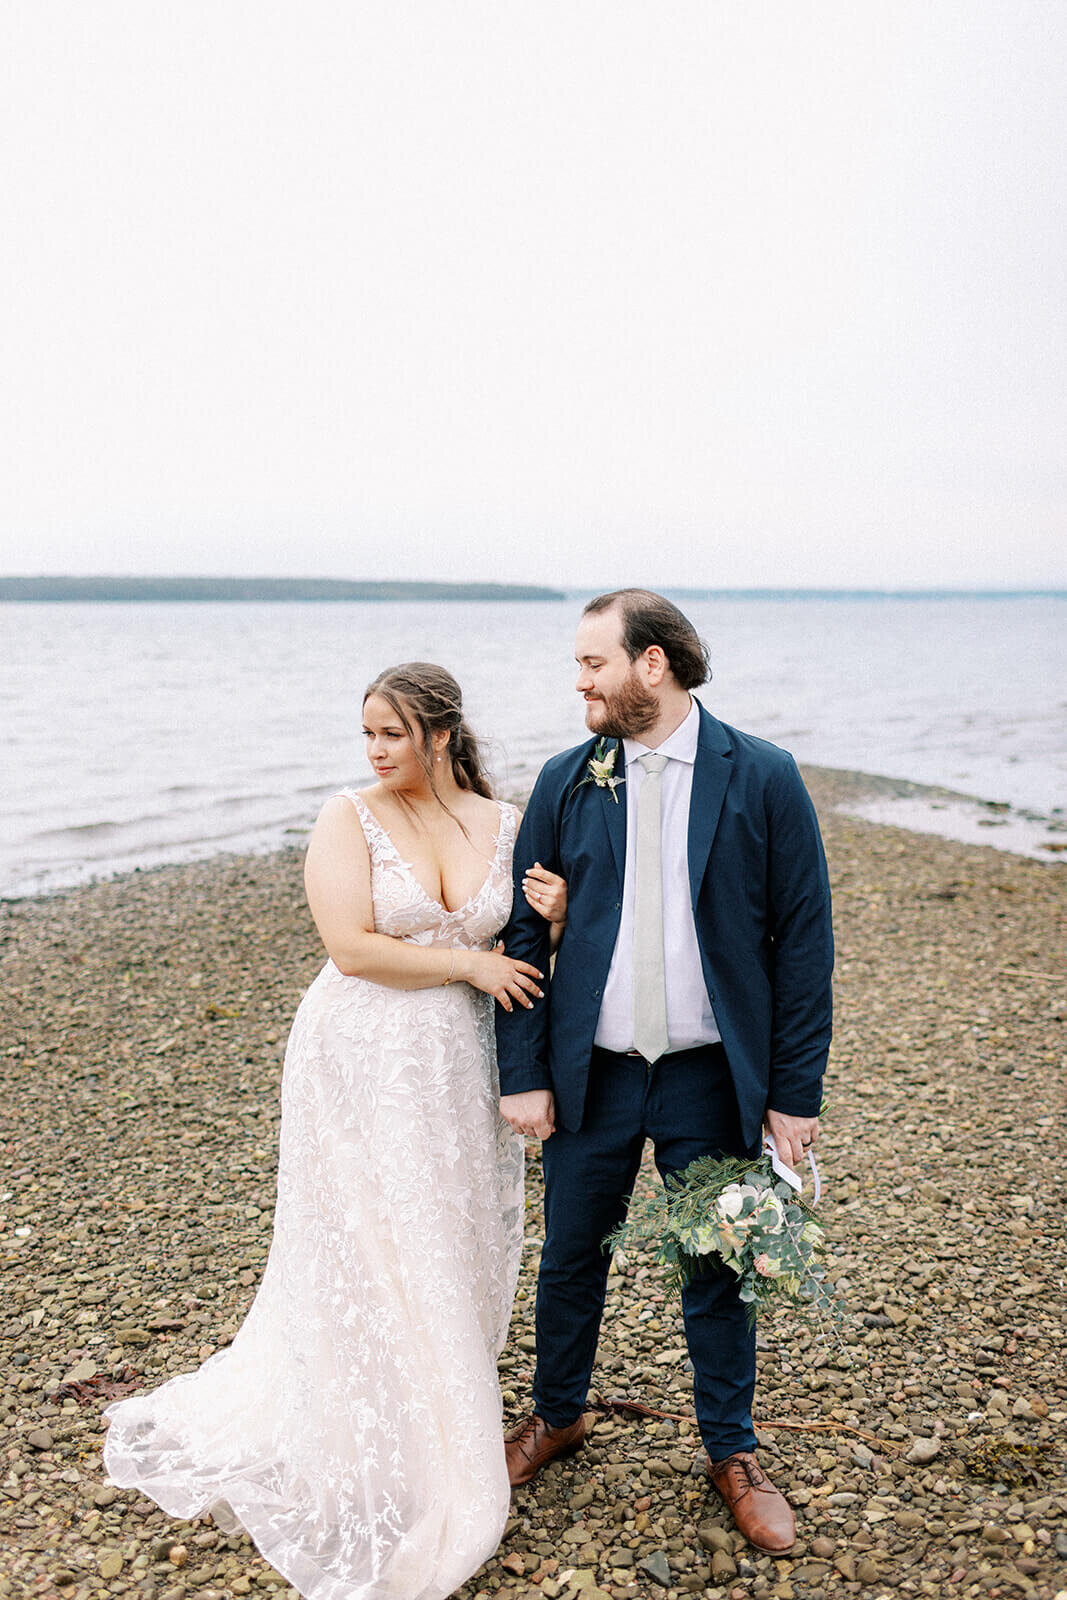 Bride-and-groom-at-beach